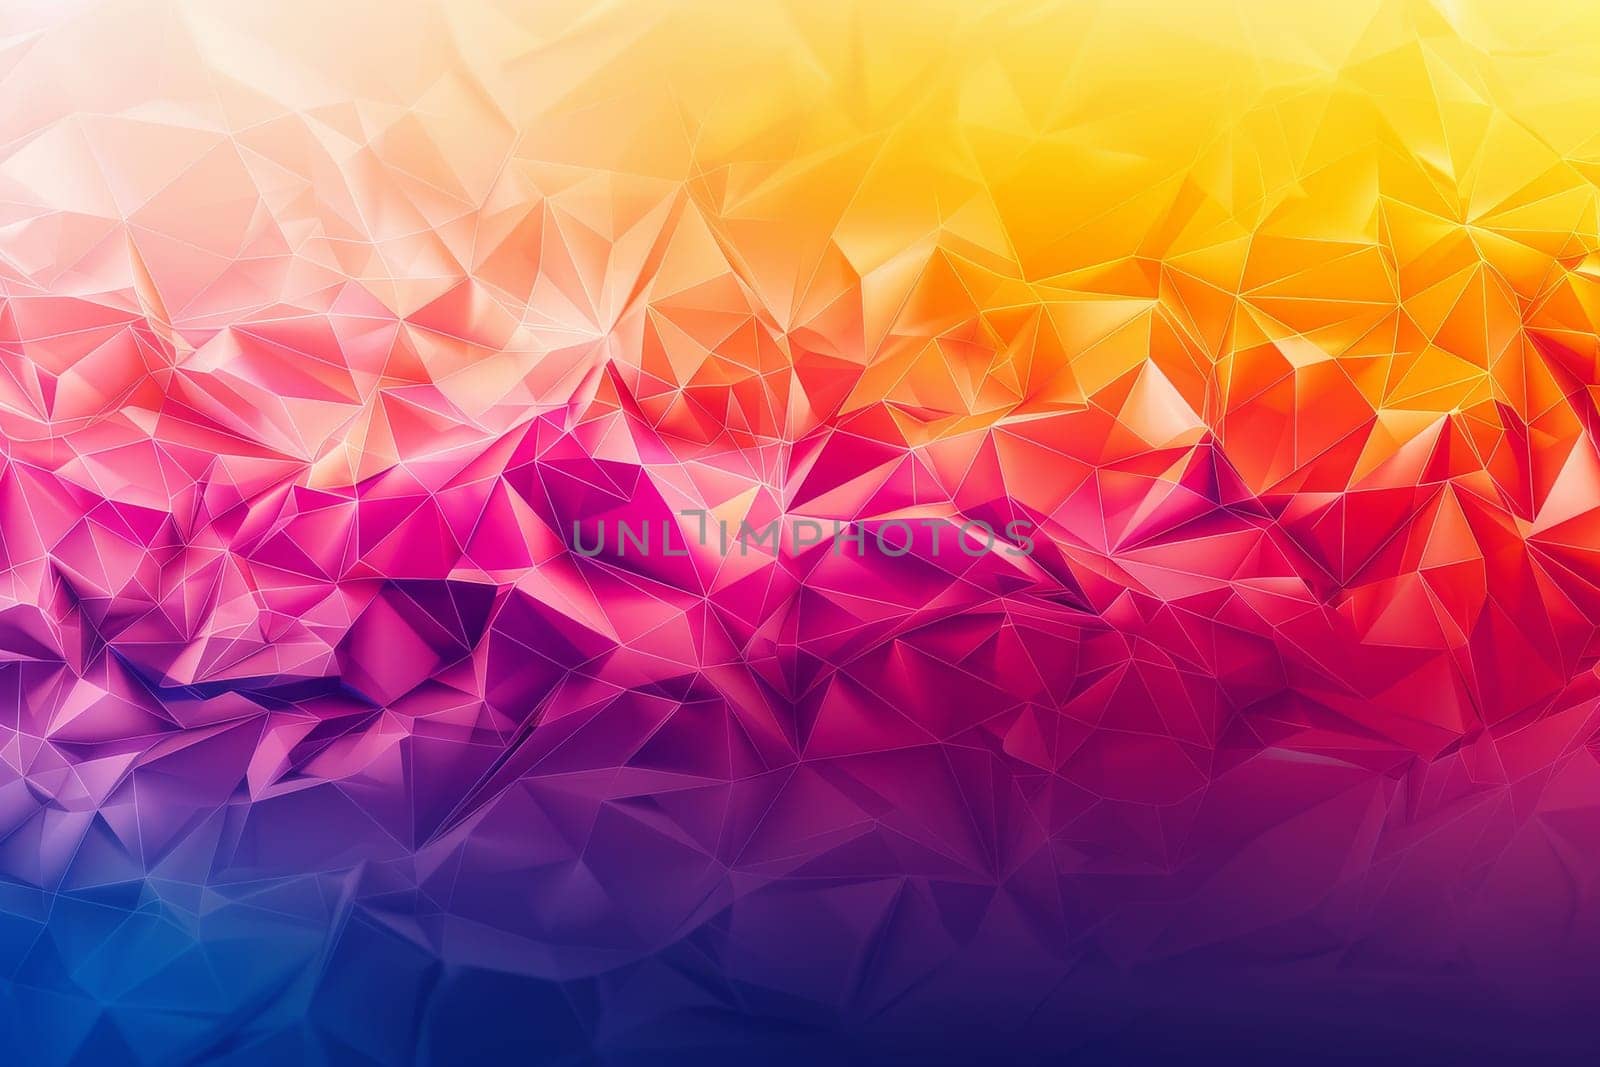 A colorful abstract background with a pink and blue gradient by itchaznong